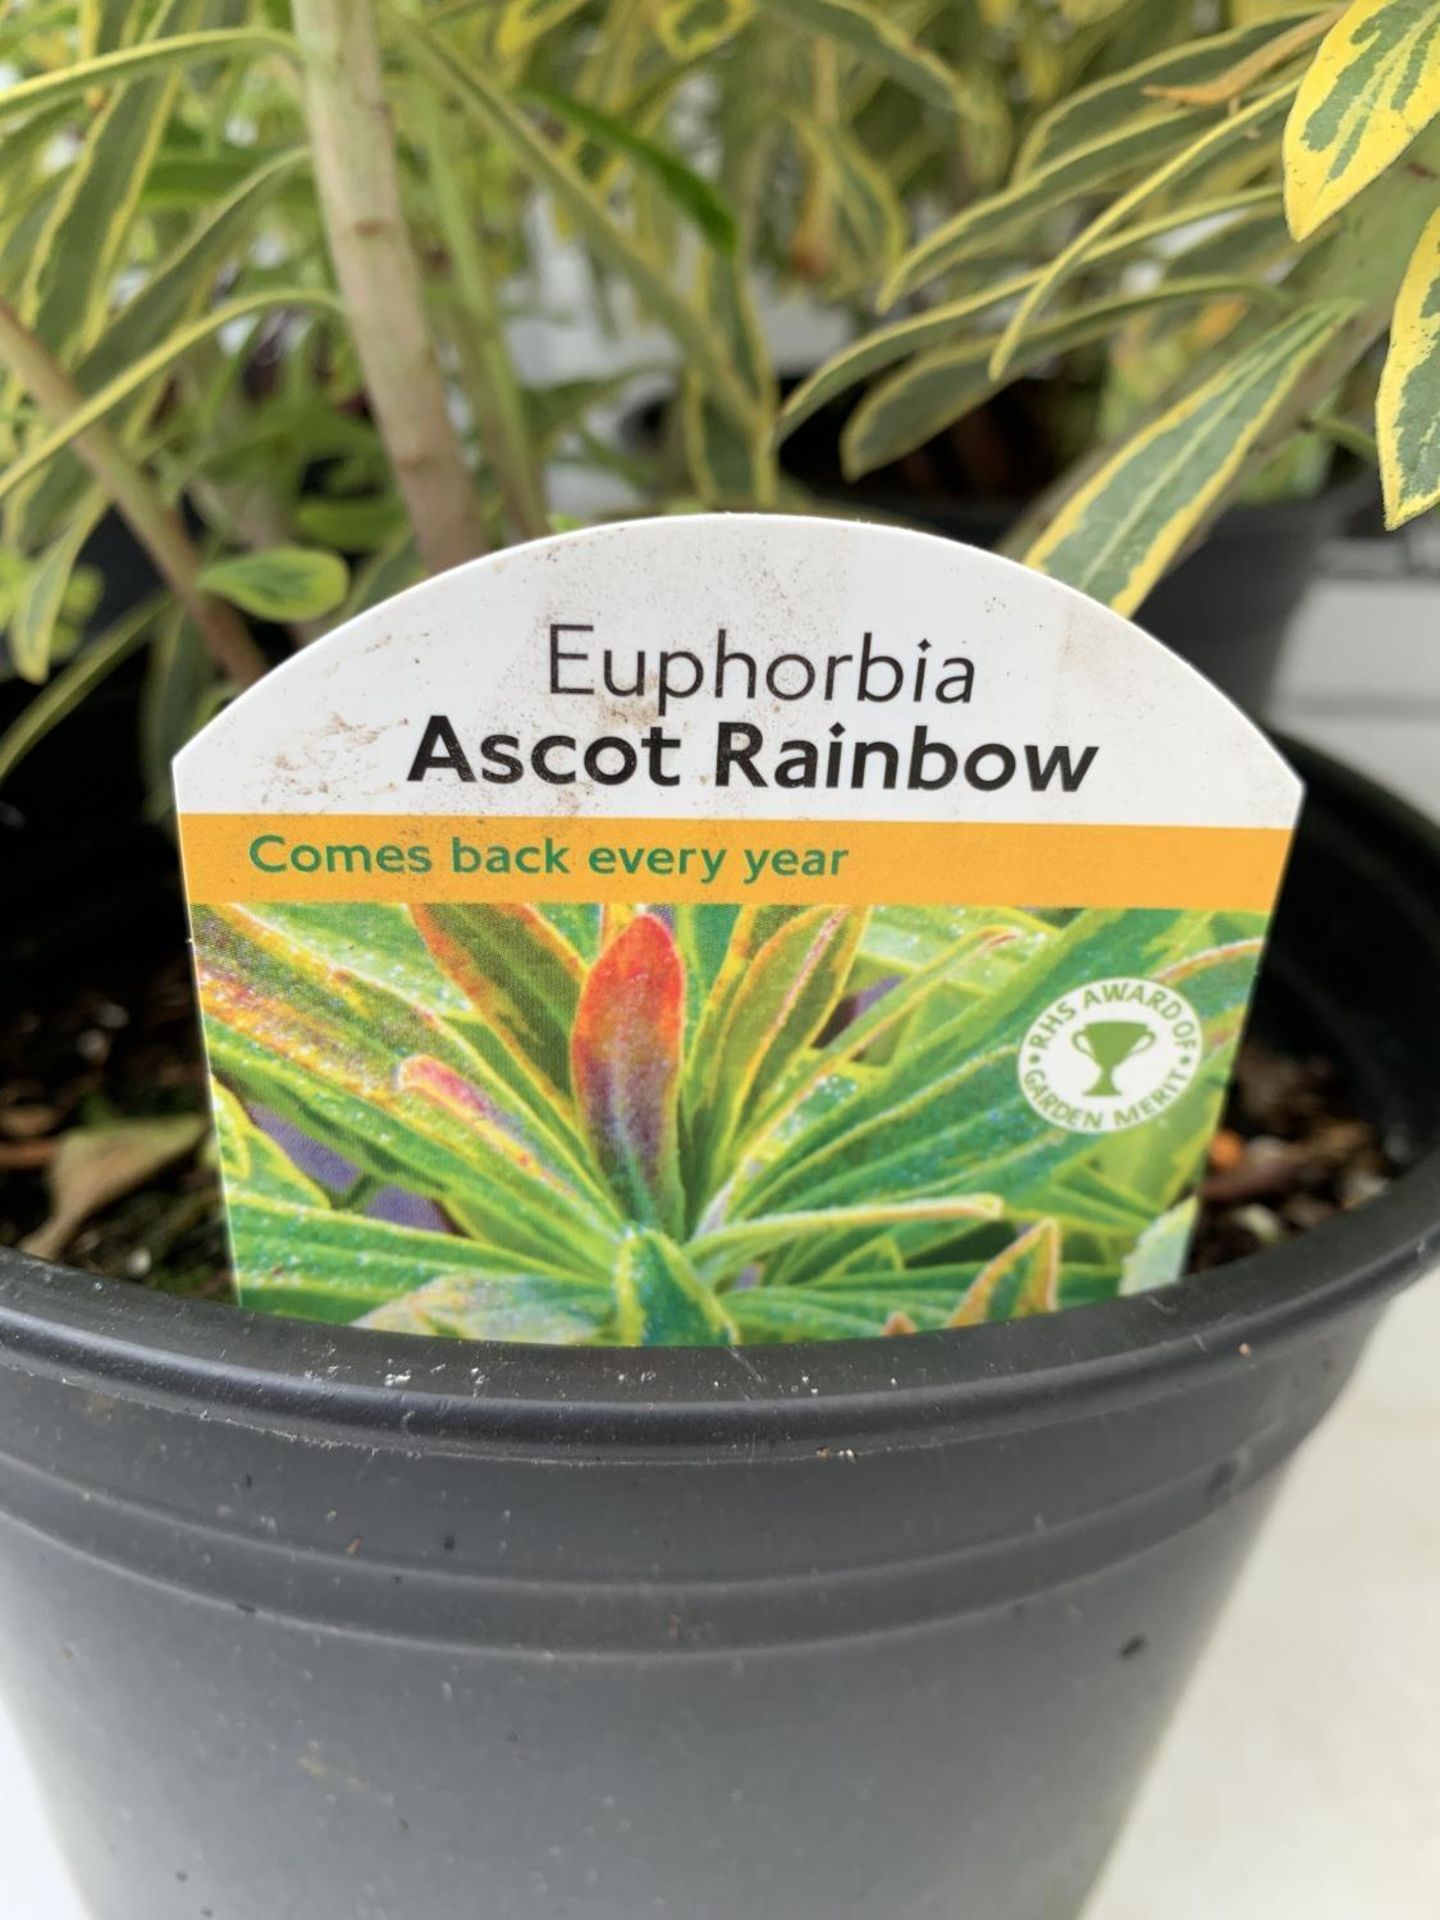 THREE EUPHORBIA ASCOT RAINBOW IN 3 LTR POTS 90CM TALL TO BE SOLD FOR THE THREE PLUS VAT - Image 5 of 5